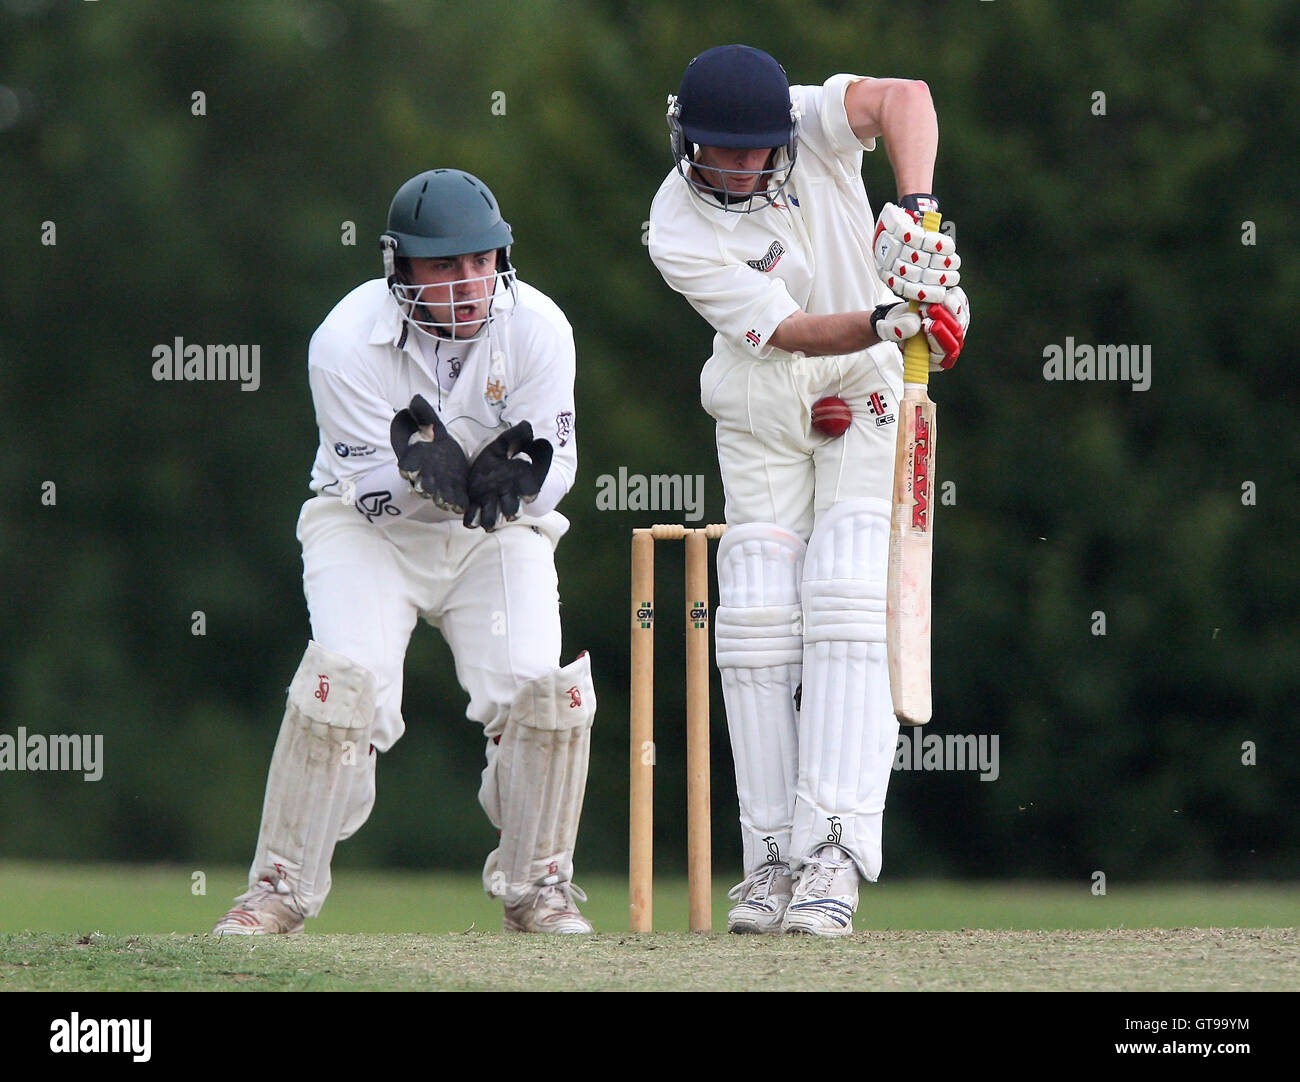 A painful blow for J Walton of Shenfield - Shenfield CC vs Harold Wood ...